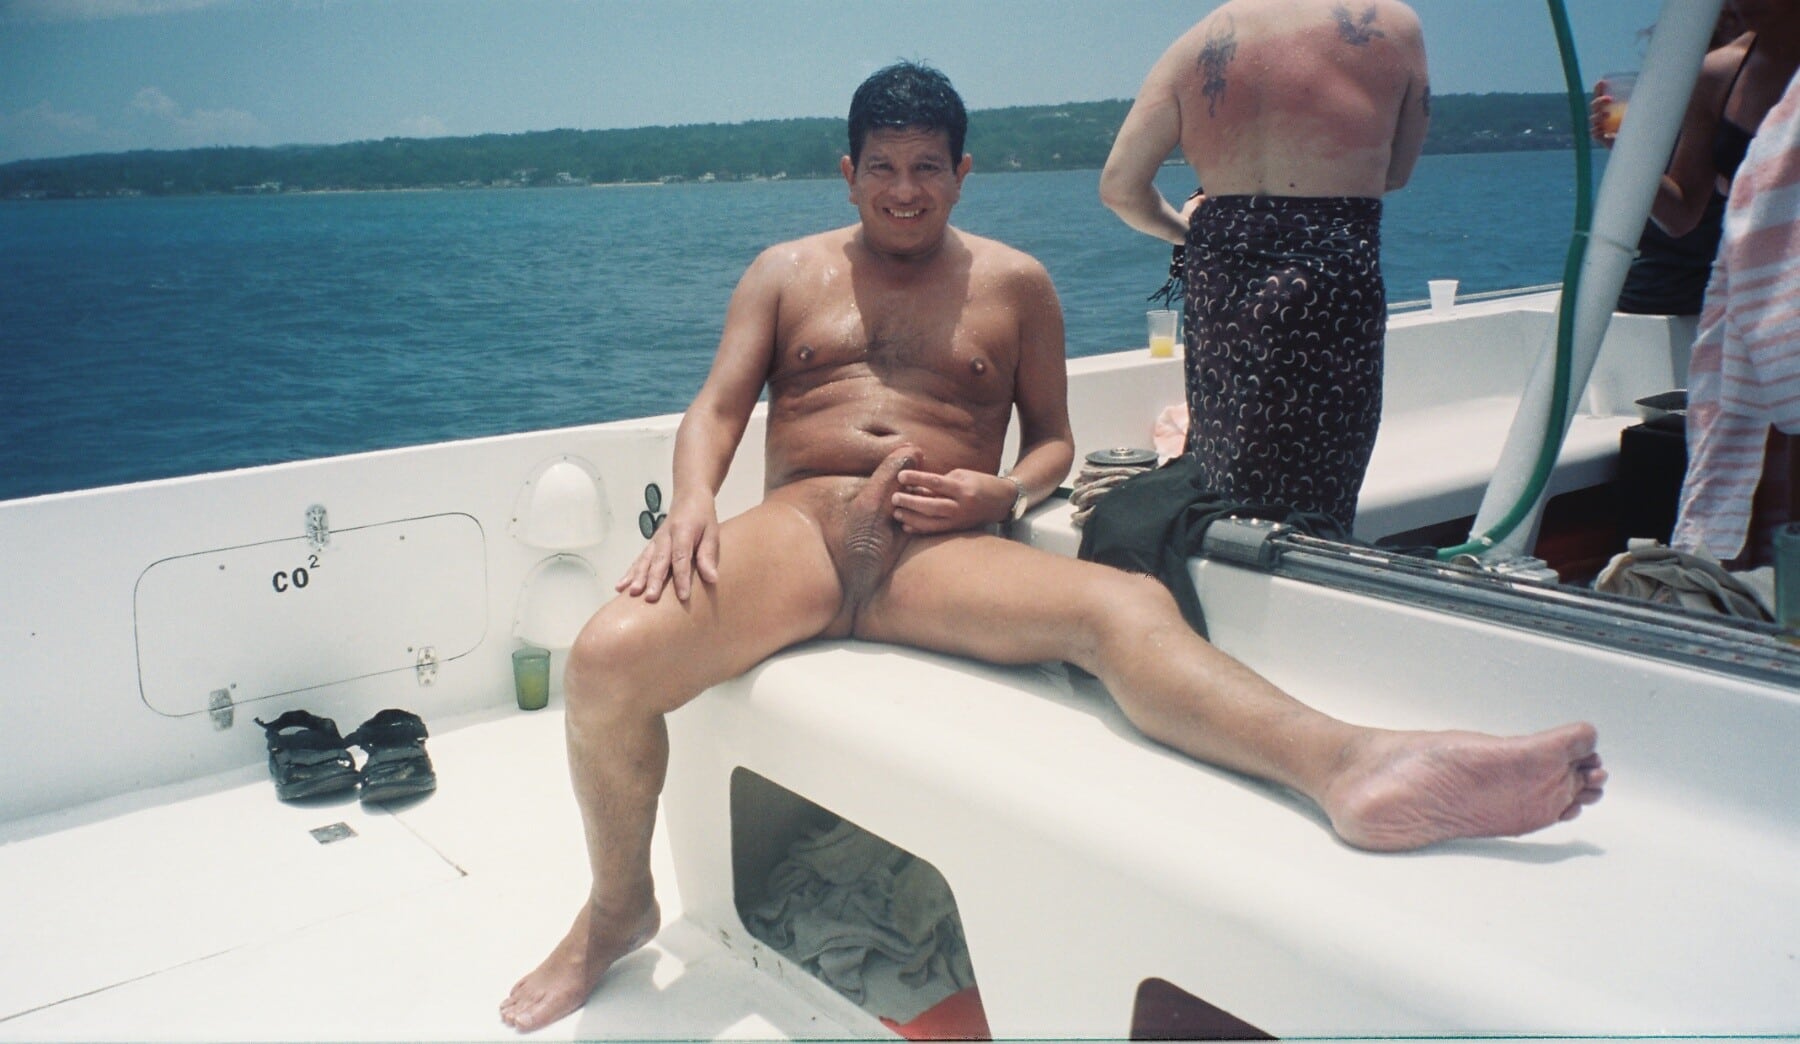 Naked Boat Sex Party Gif - Fun on party boat Dick Flash Pics, Real Amateurs from Google, Tumblr,  Pinterest, Facebook, Twitter, Instagram and Snapchat.